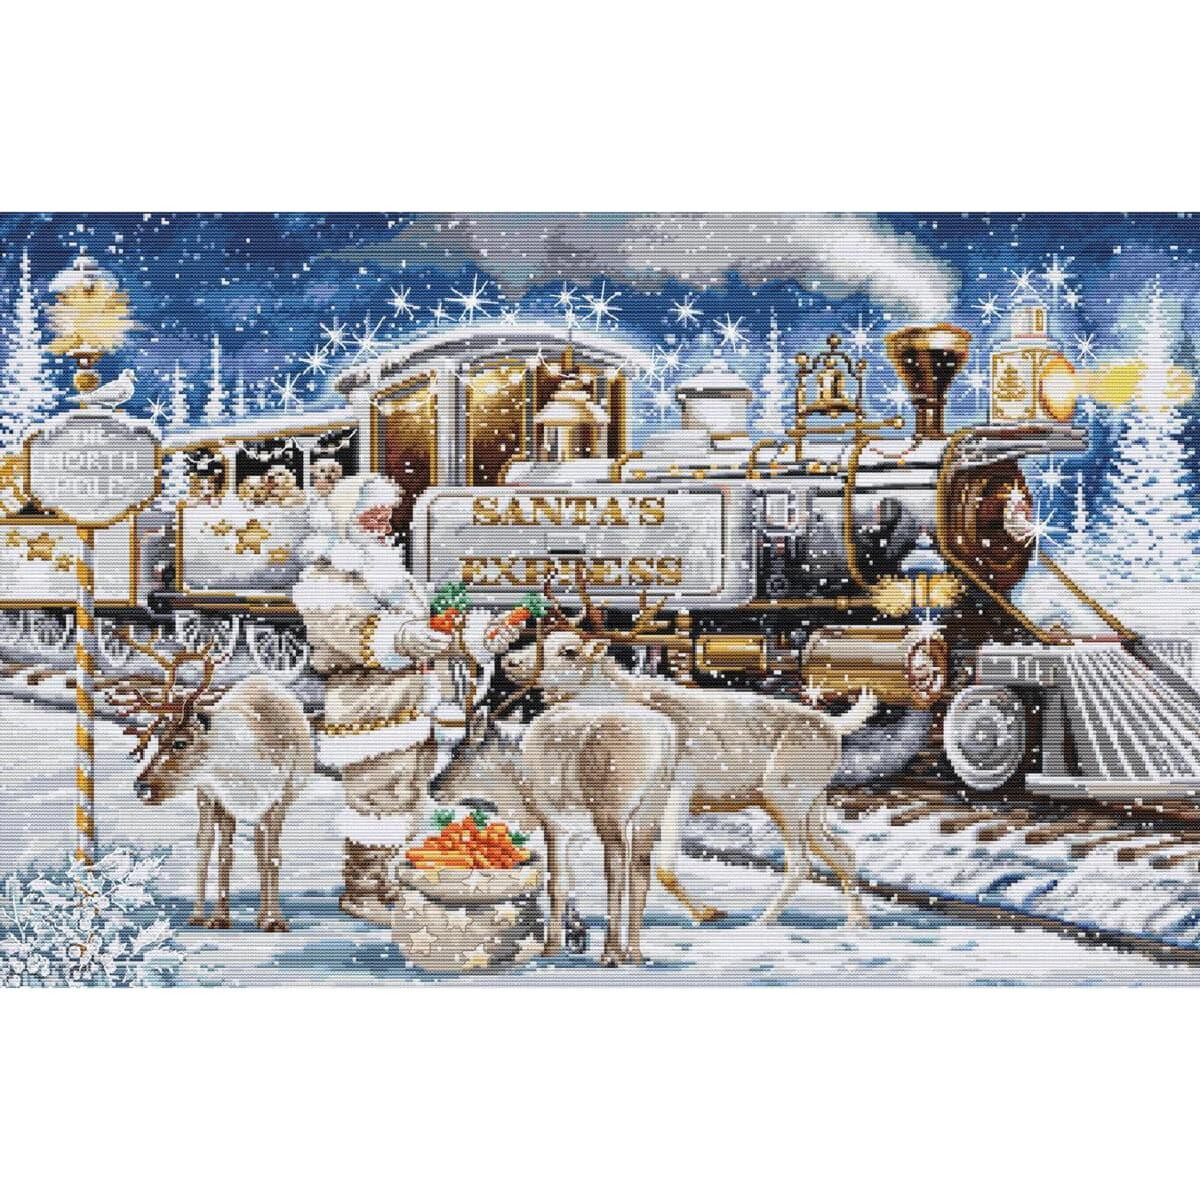 A festive scene with Santa Claus and a train with the...